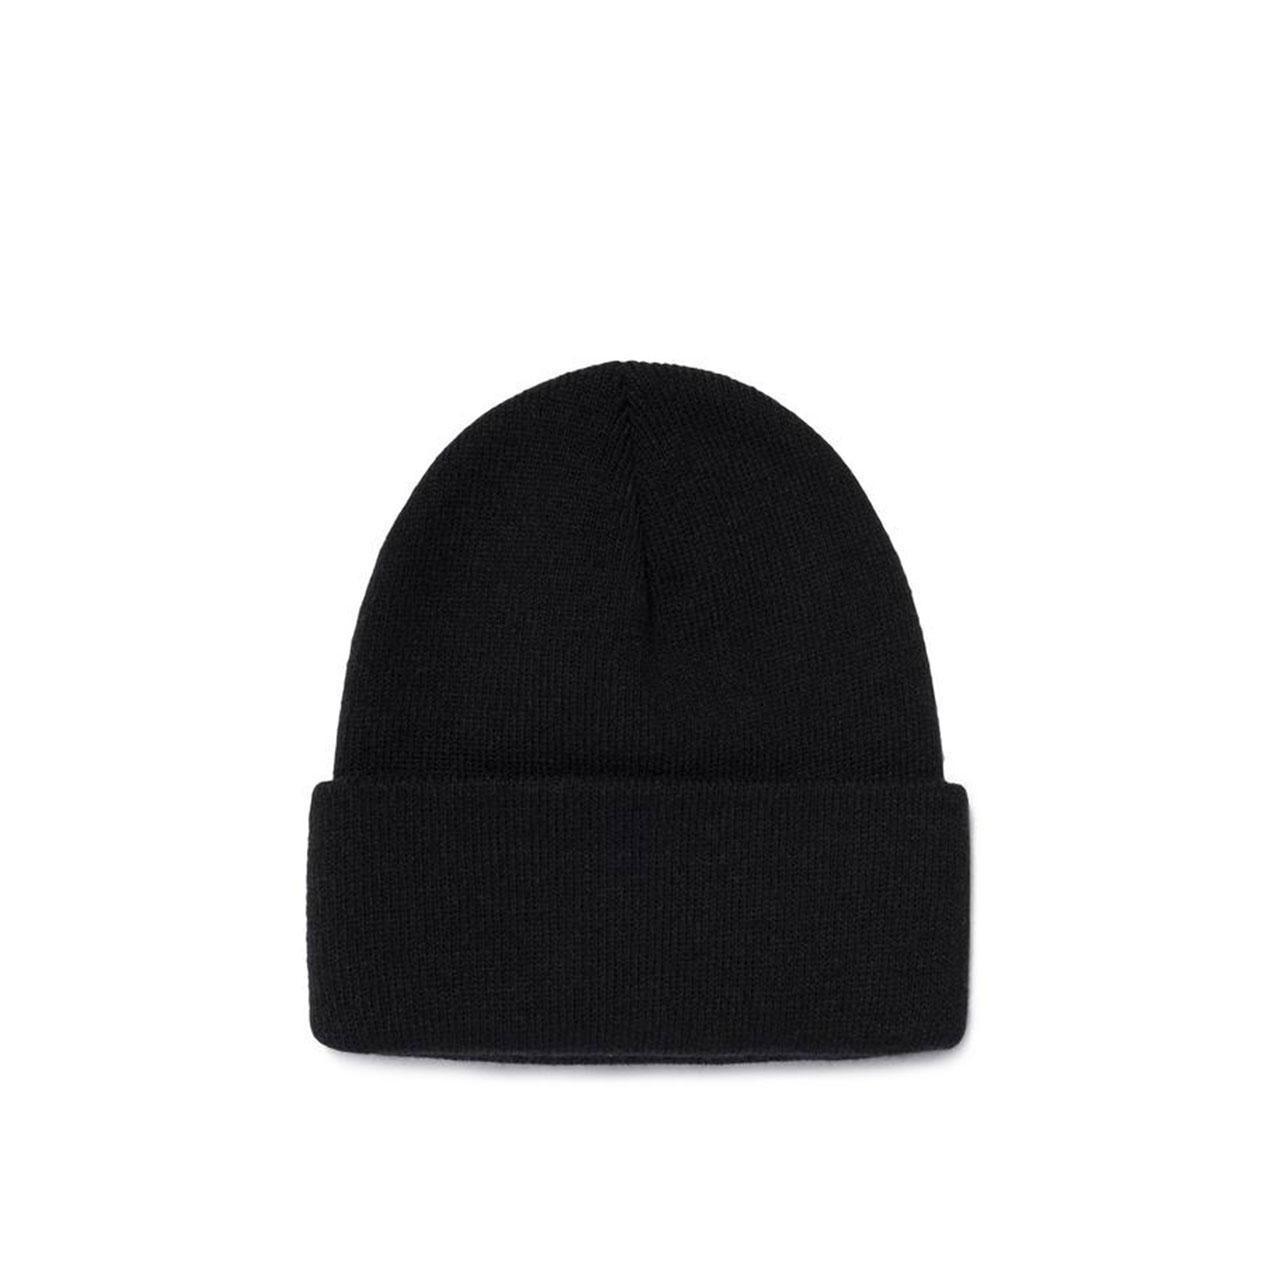 Stussy Synthetic Fa19 Stock Cuff Beanie in Black for Men - Lyst